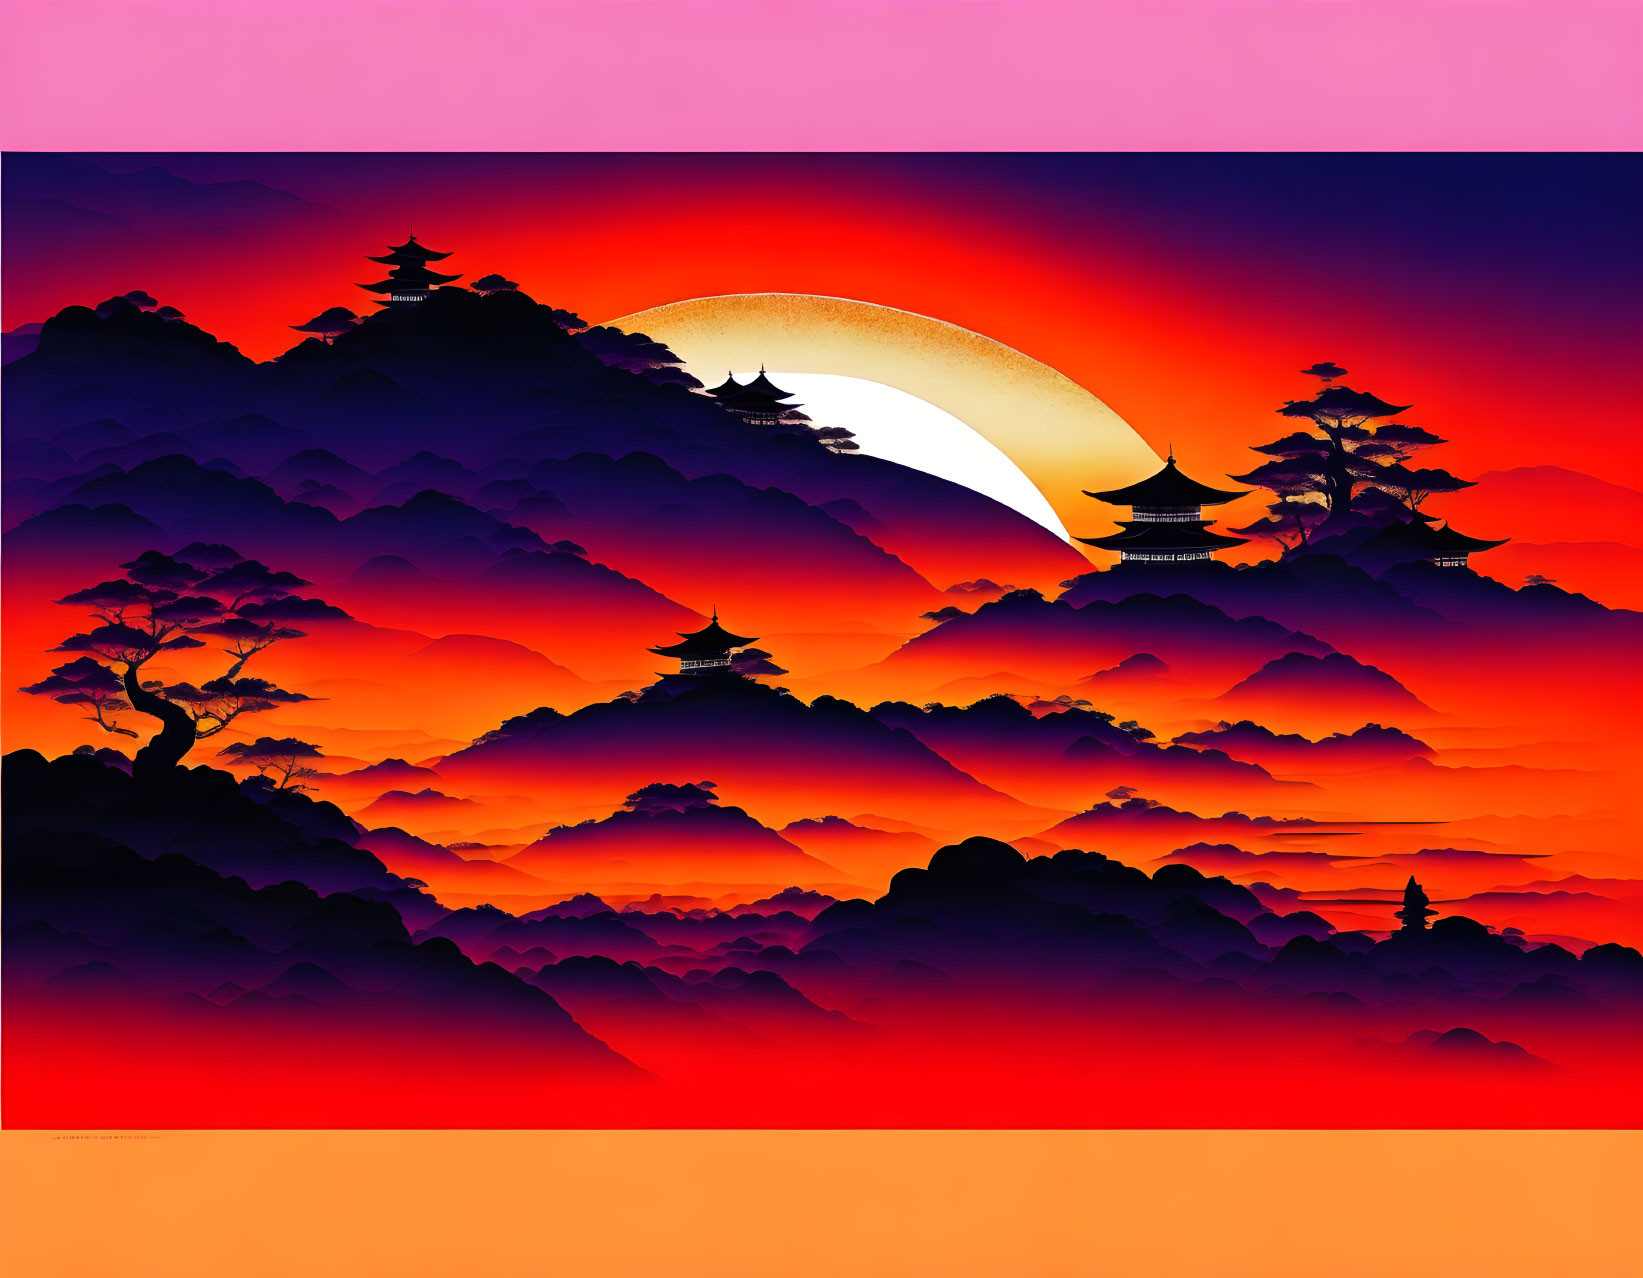 Japanese landscape illustration: Sunset with pagodas, trees, and mountains